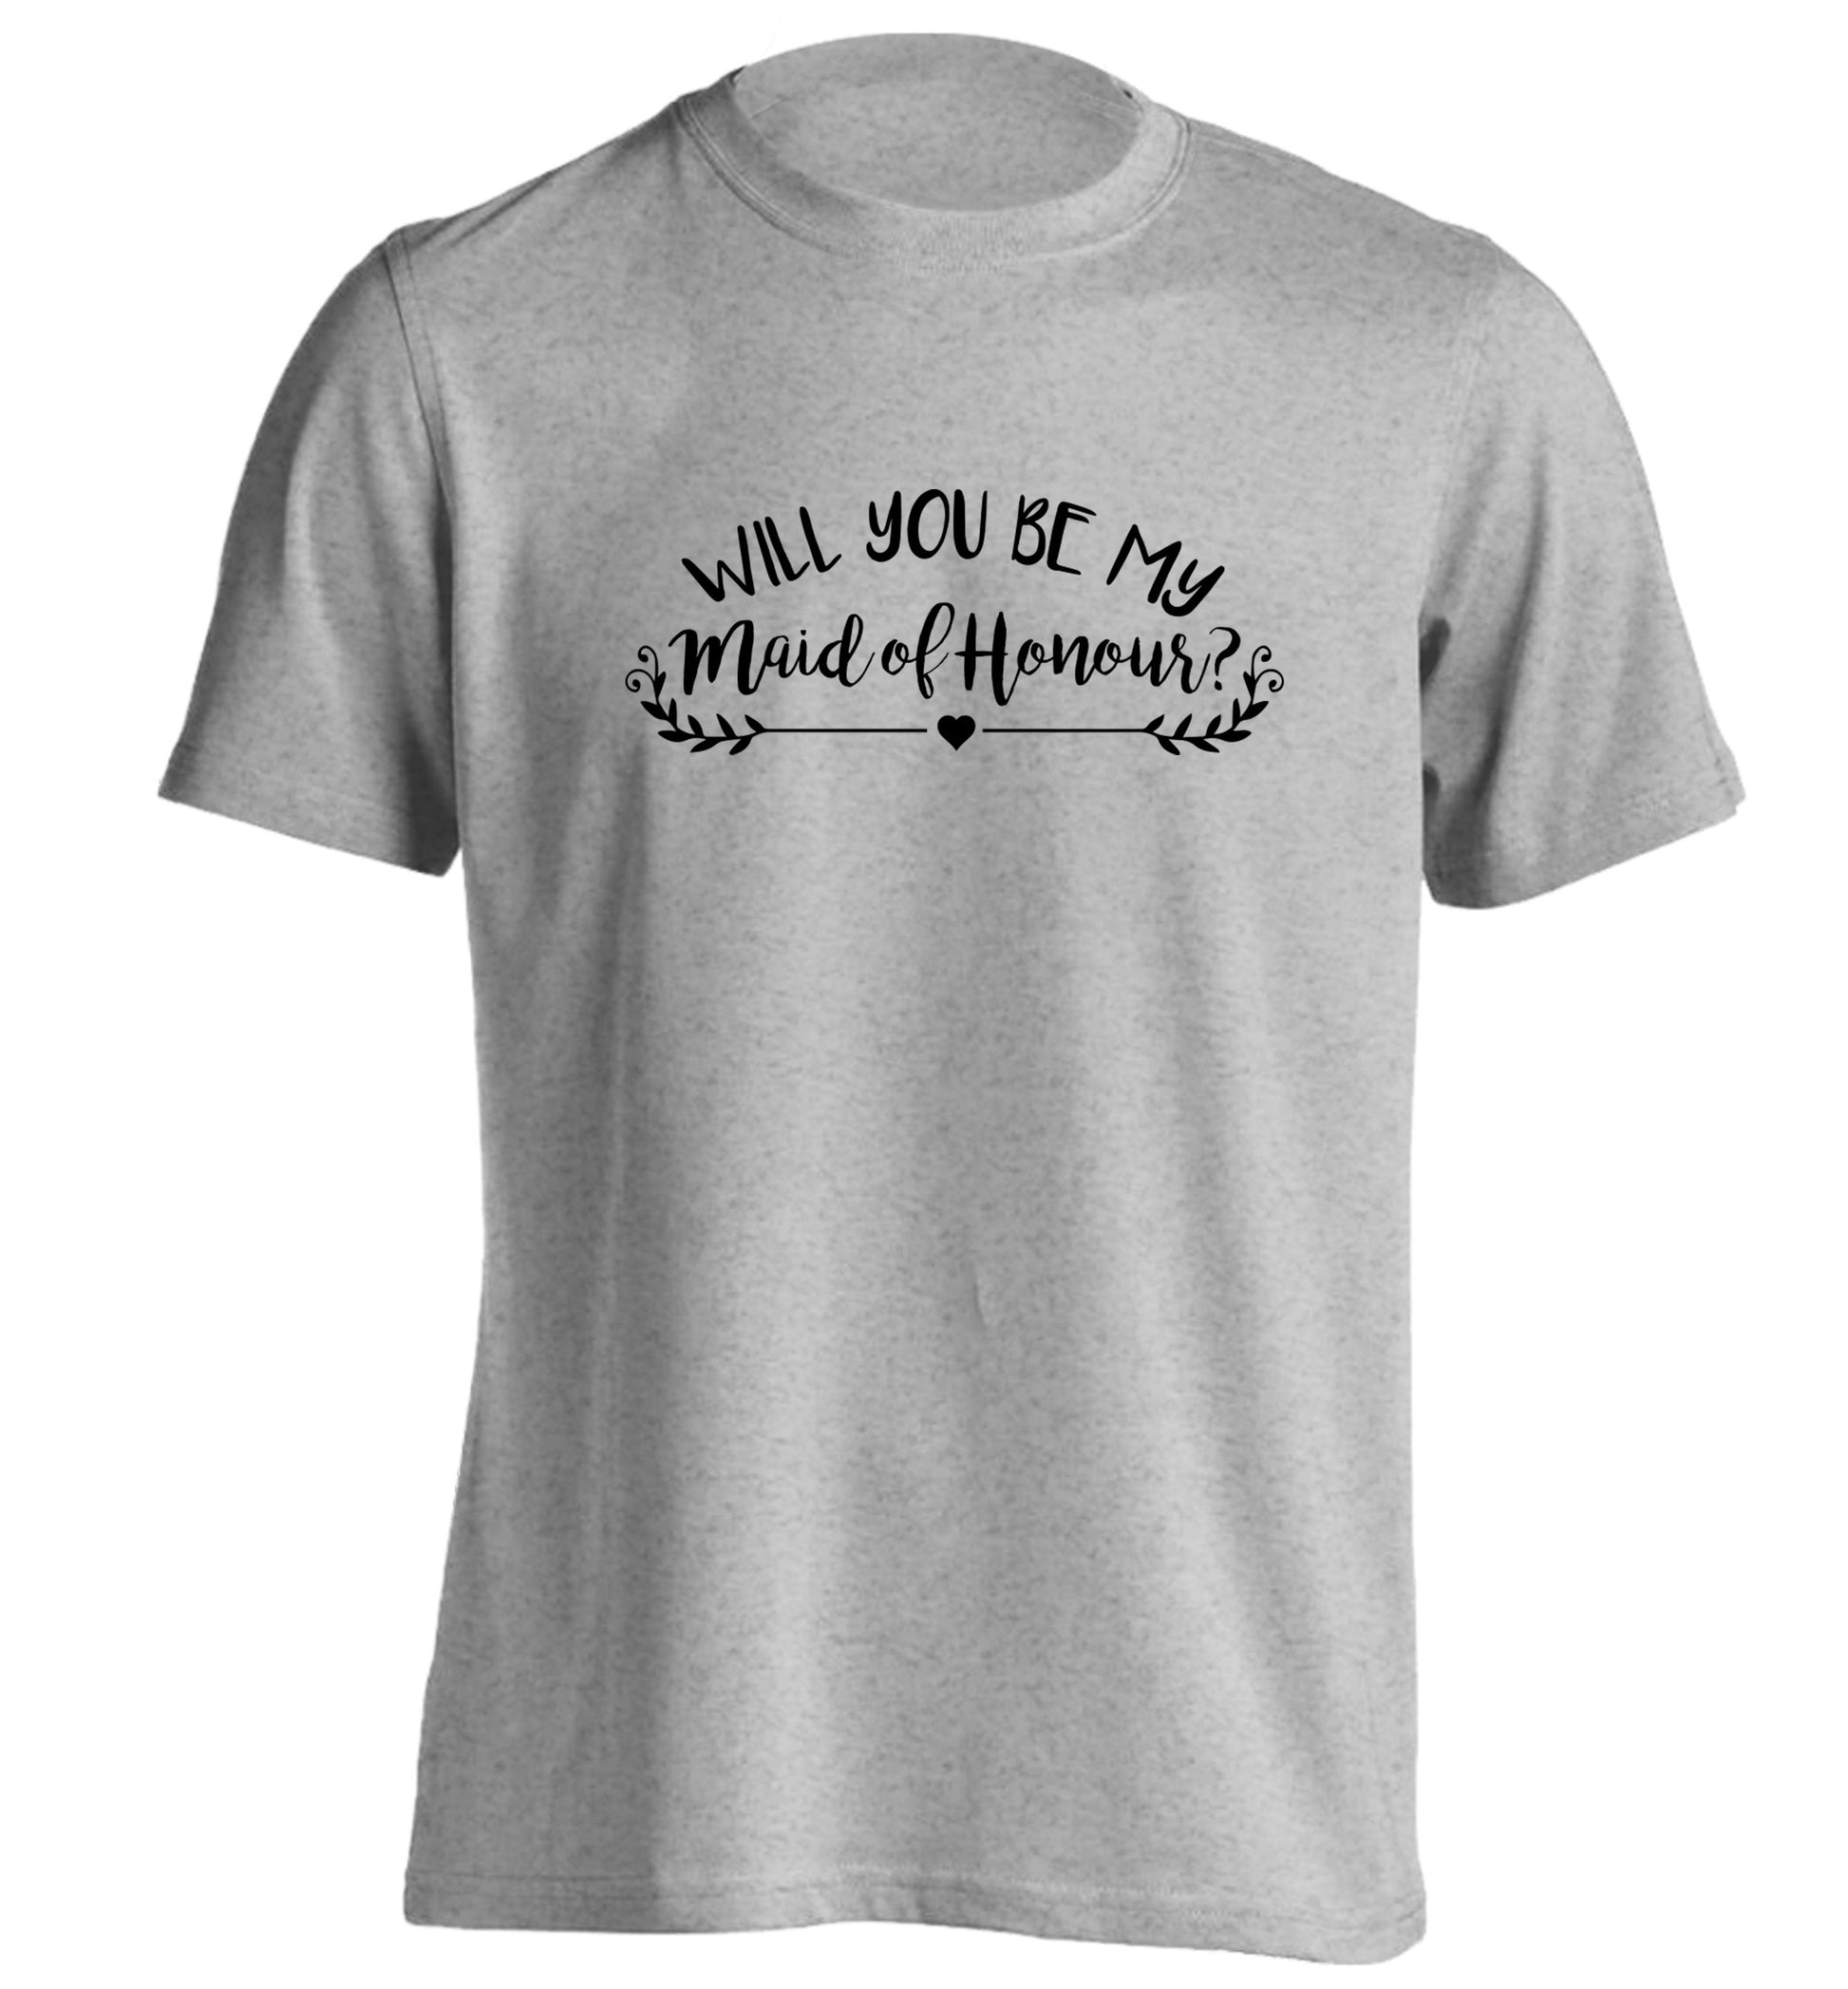 Will you be my maid of honour? adults unisex grey Tshirt 2XL